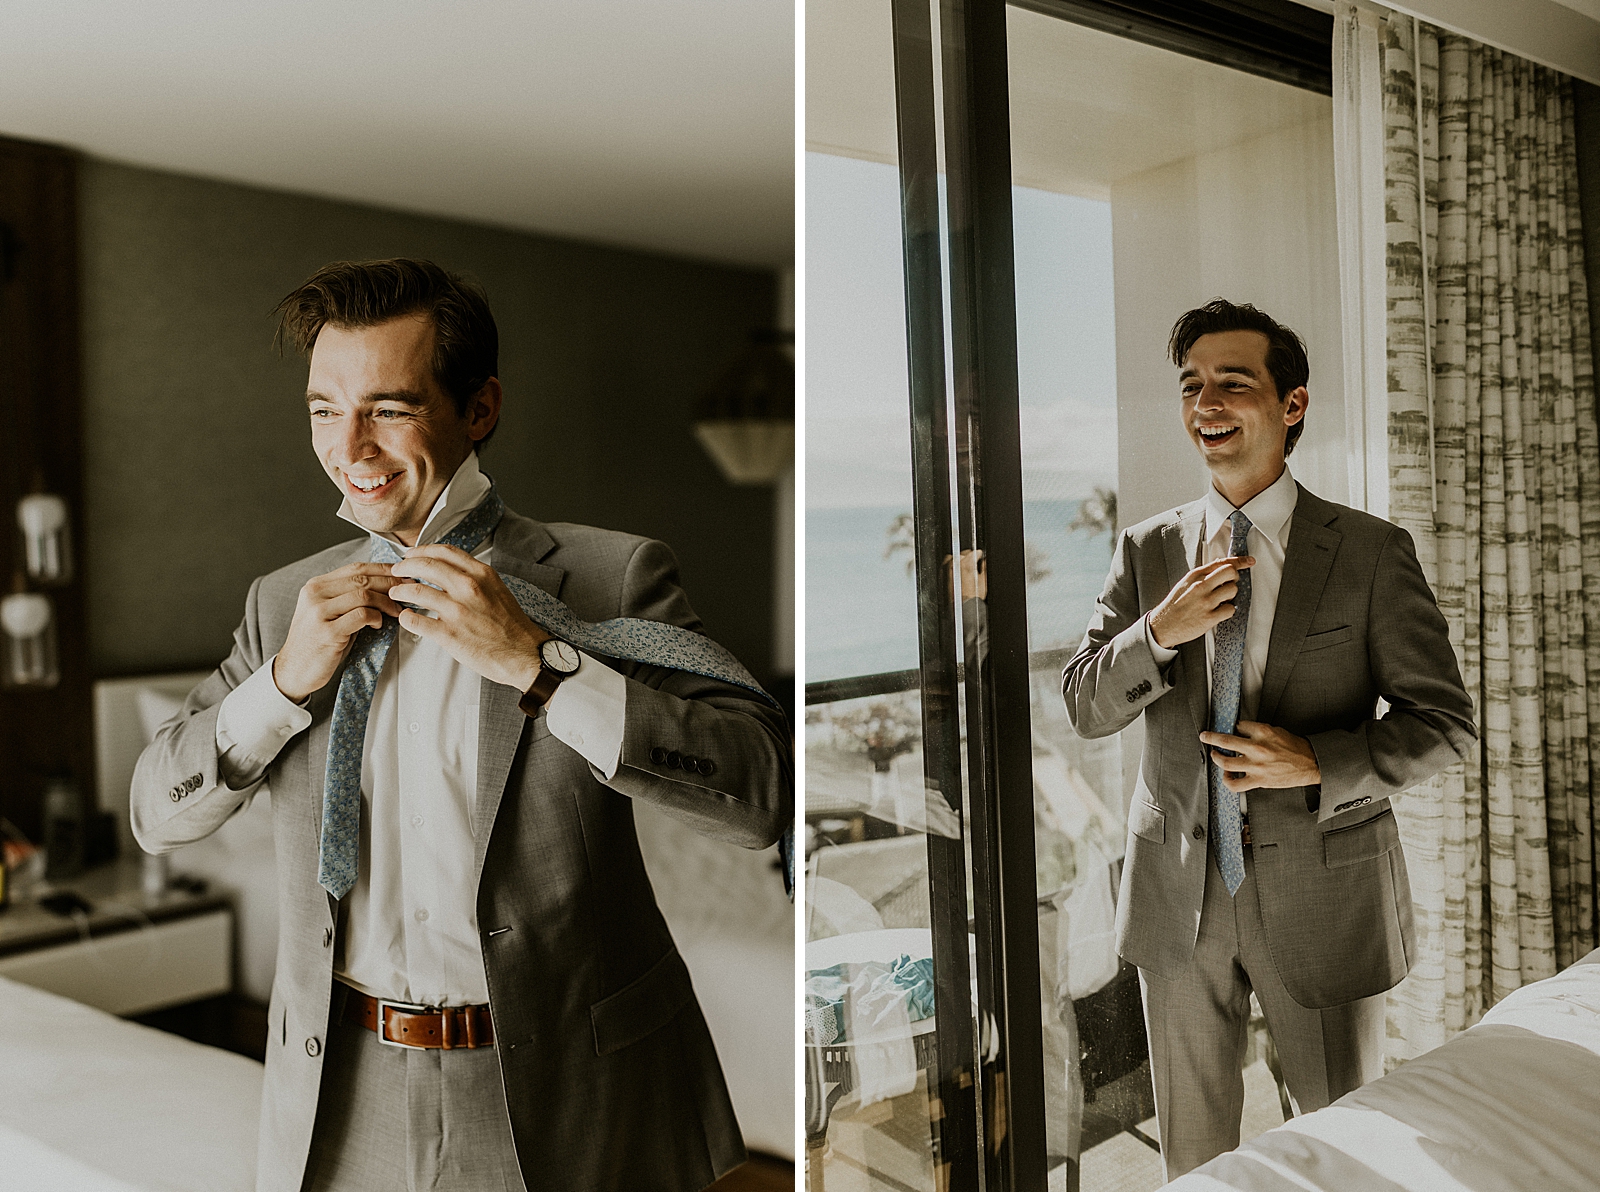 Groom getting ready in hotel room putting tie on